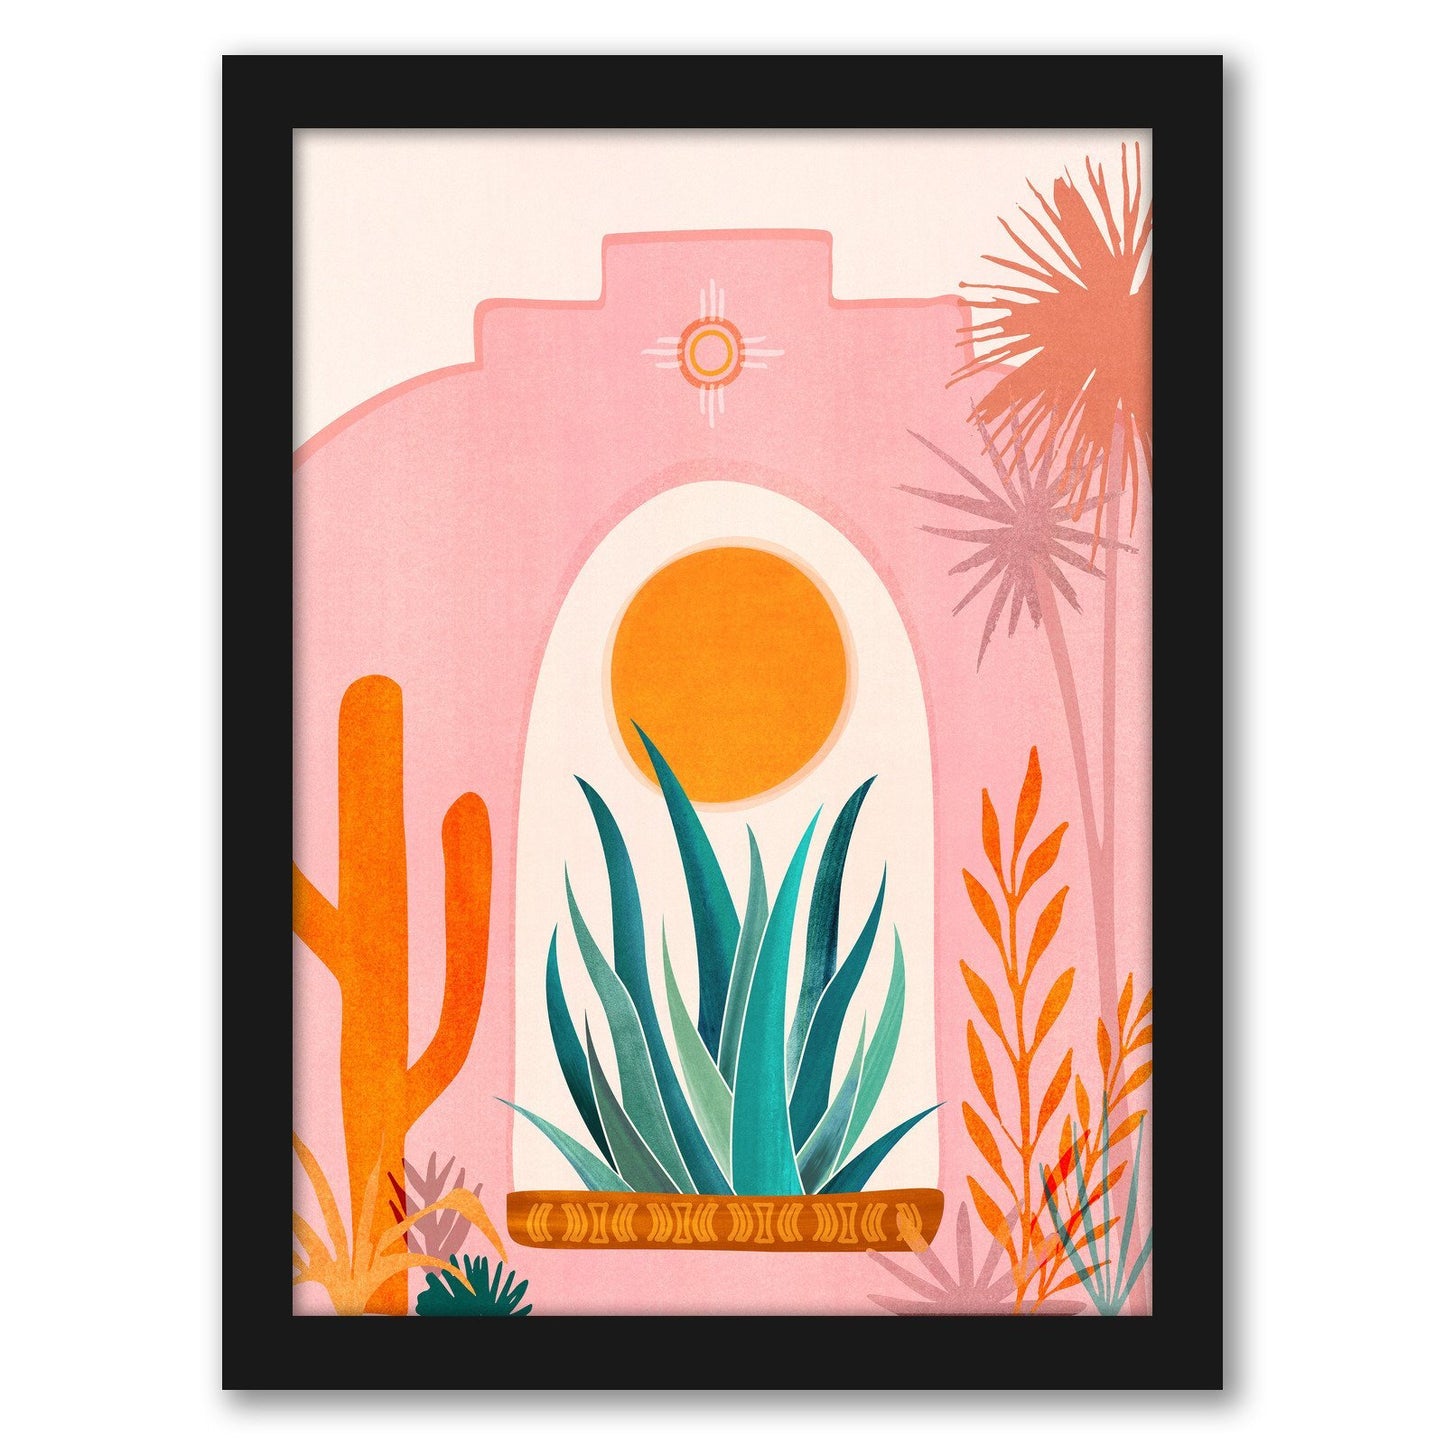 A New Day Begins by Modern Tropical - Black Framed Print - Wall Art - Americanflat